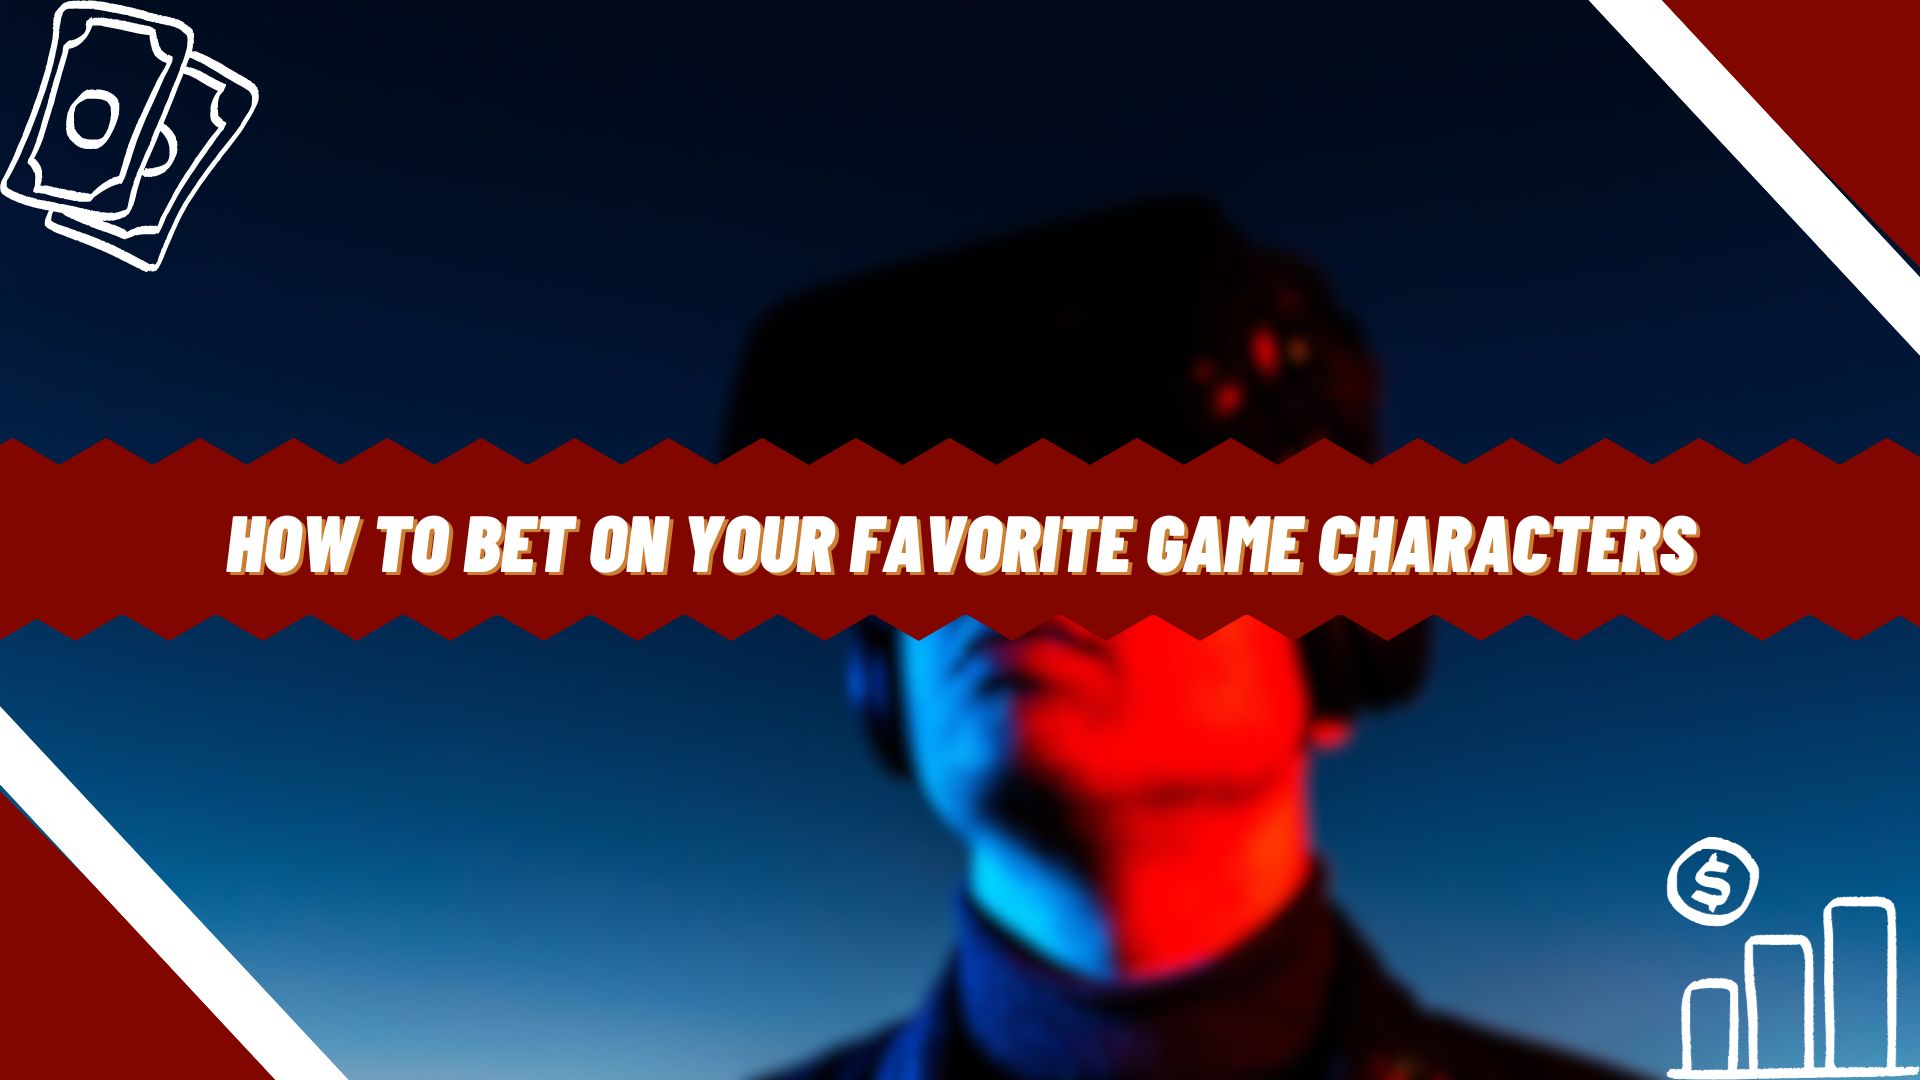 How to Bet on Your Favorite Game Characters